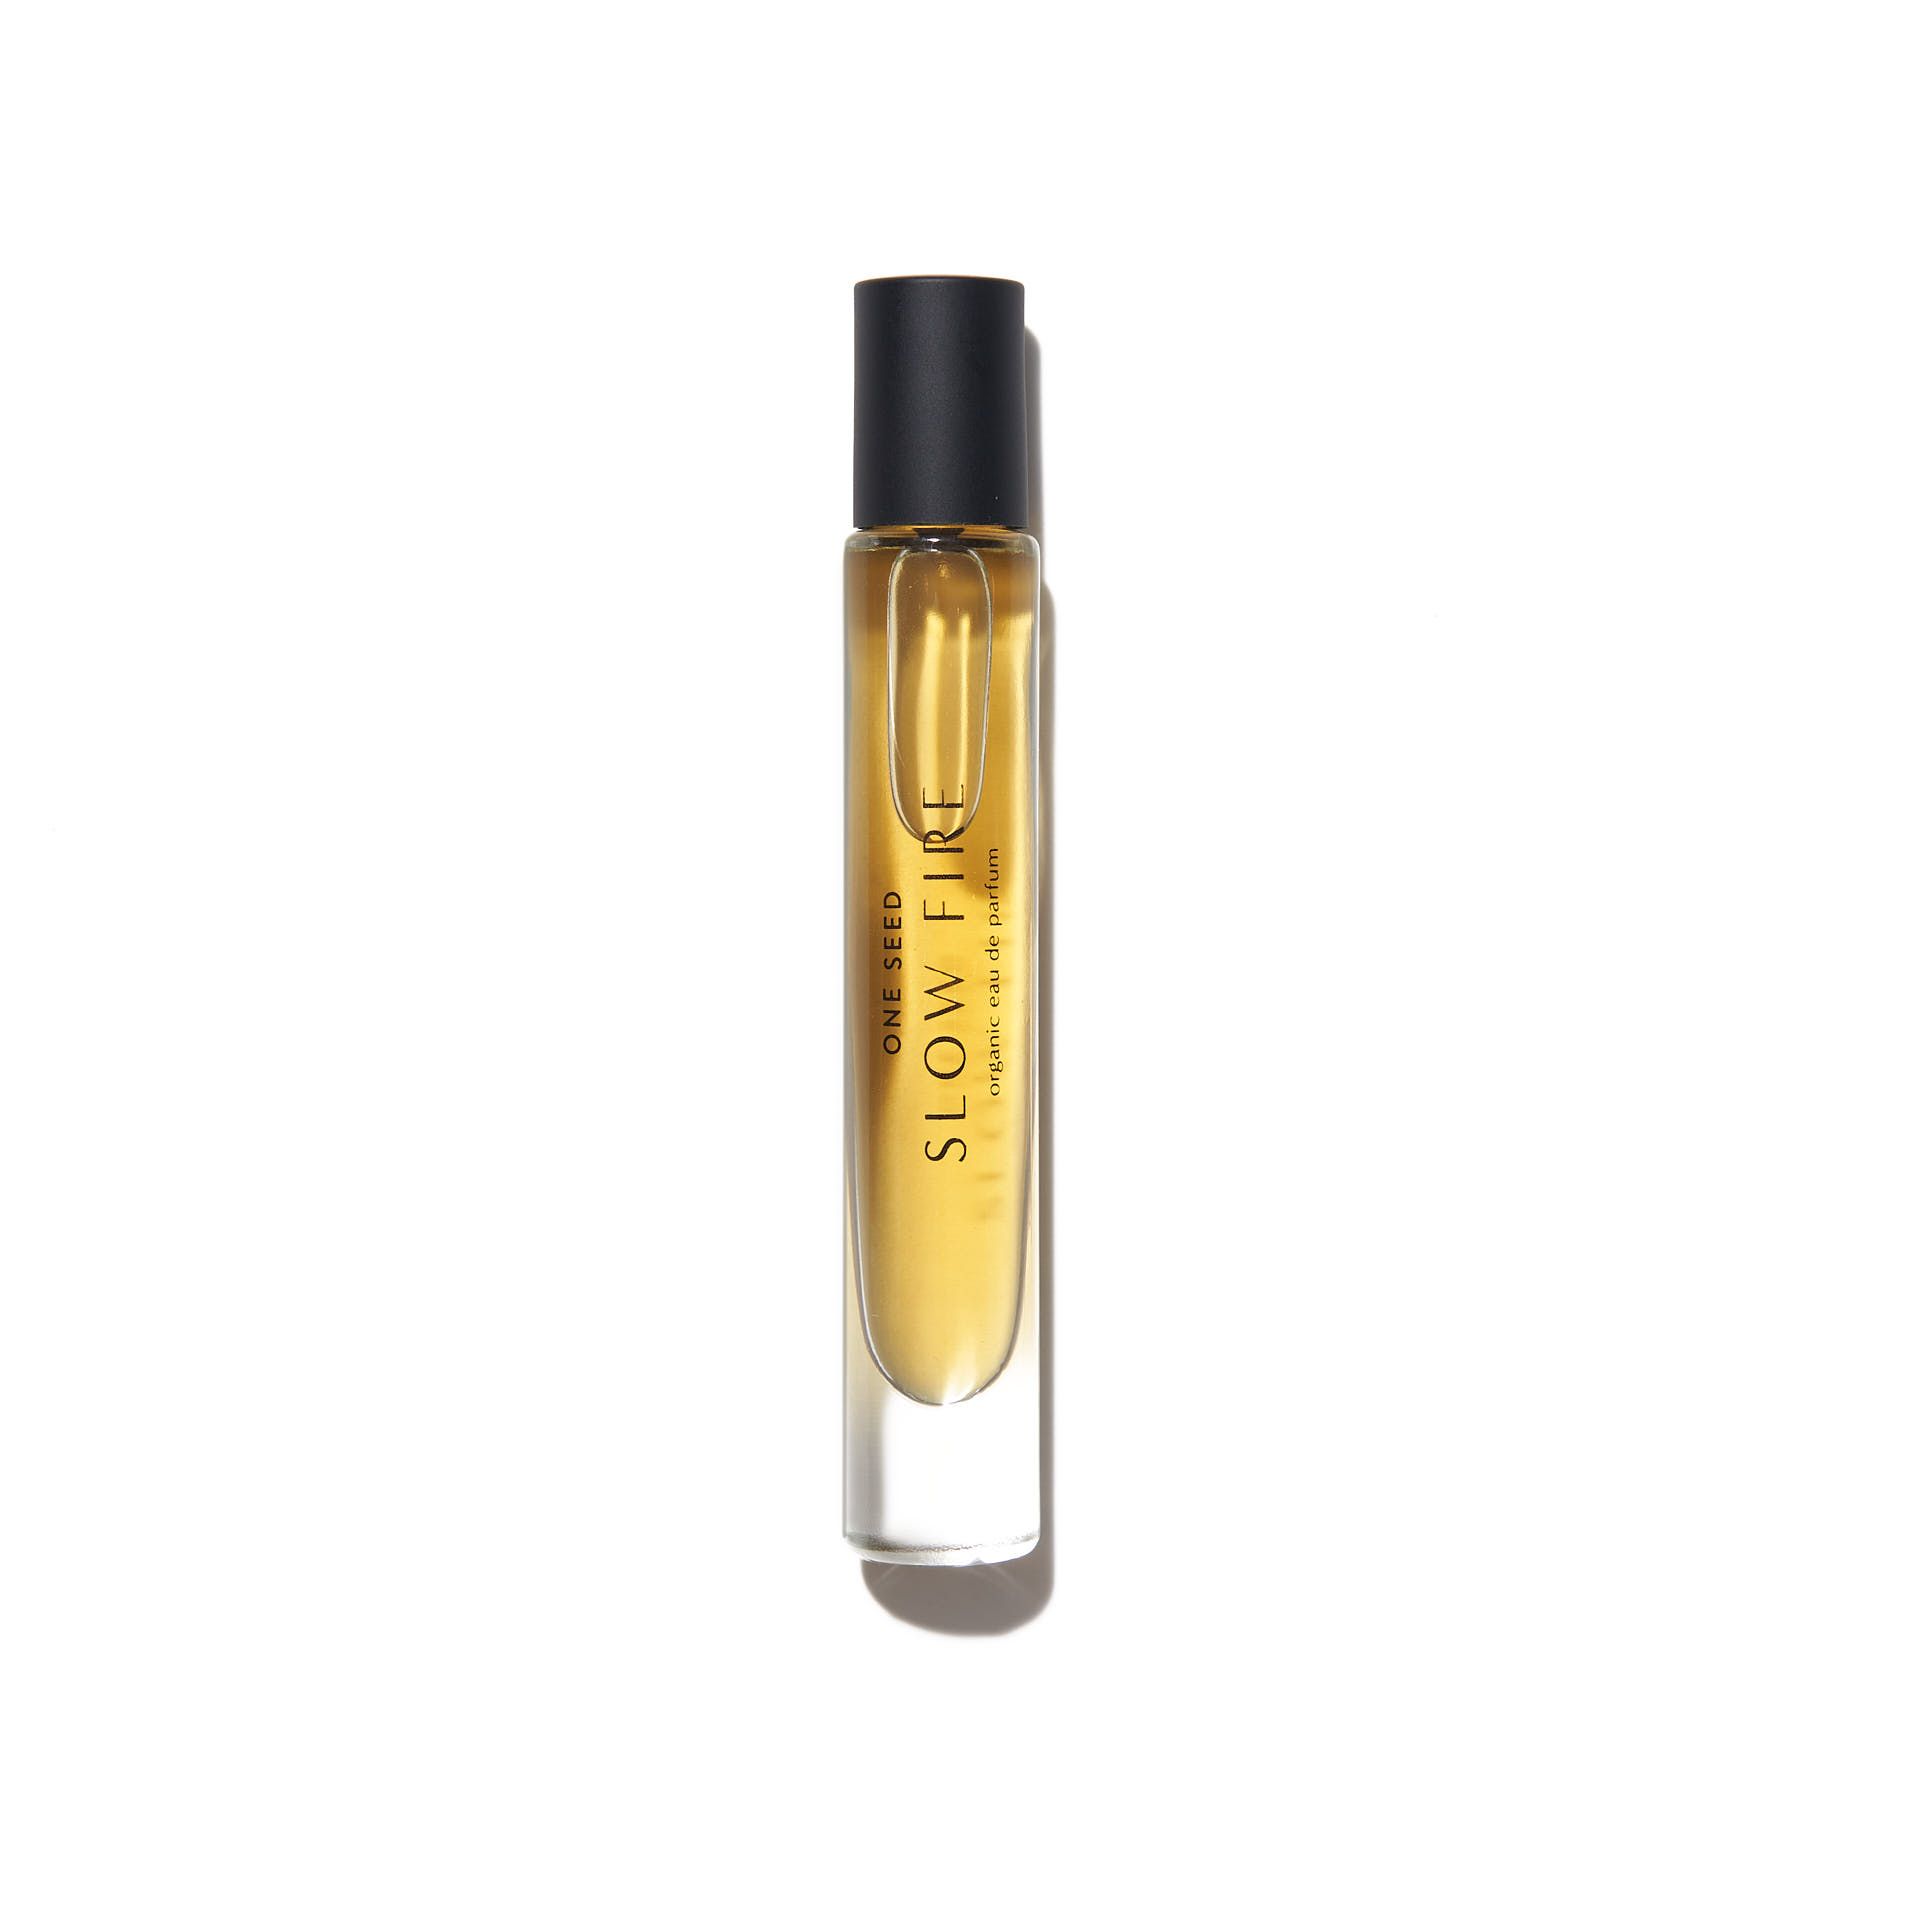 Slow Fire One Seed perfume - a fragrance for women and men 2009